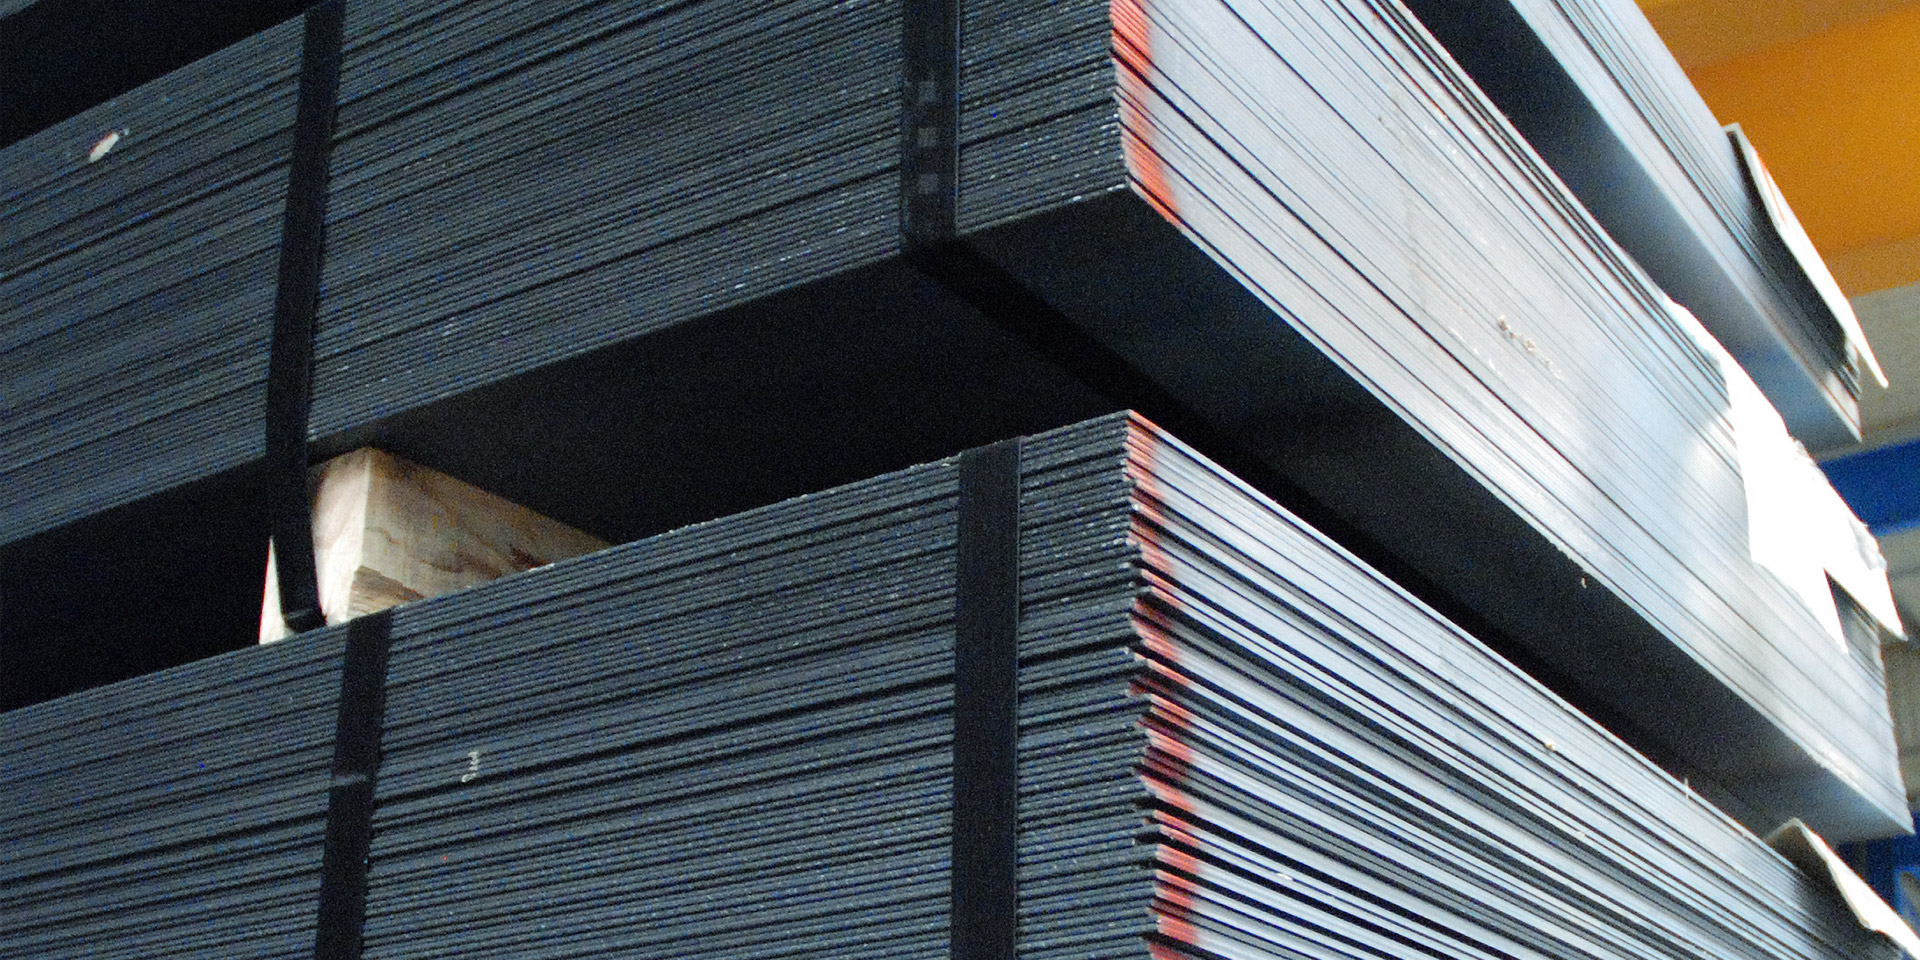 Thin steel plates on a rack